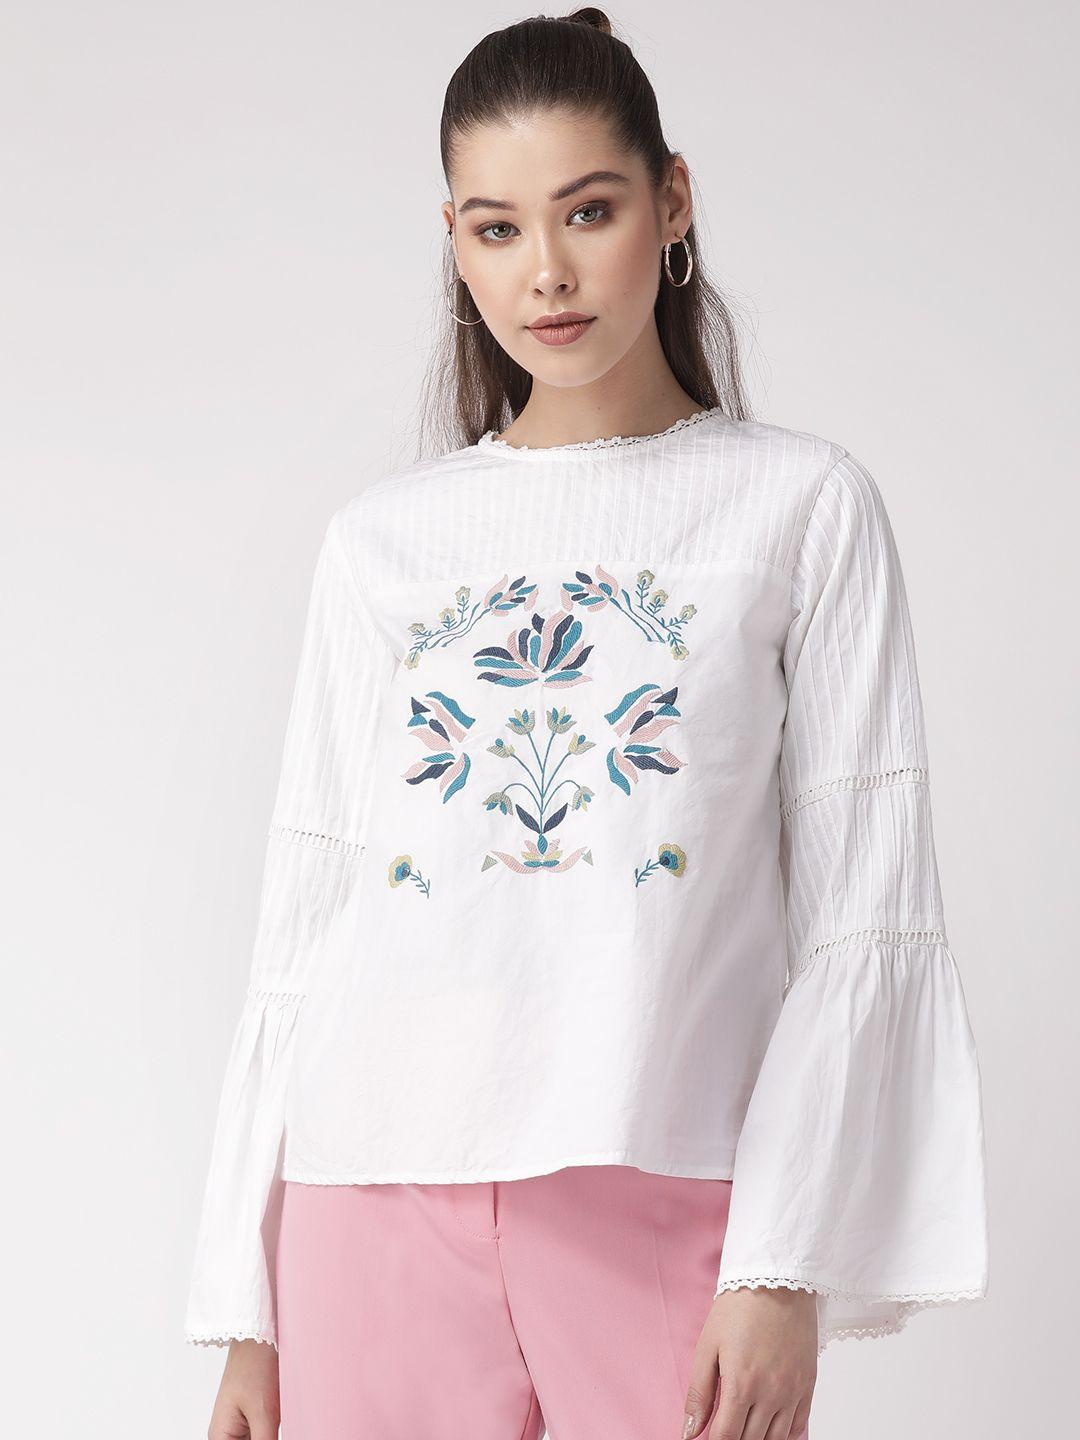 scoup women white & blue floral embroidery pure cotton top